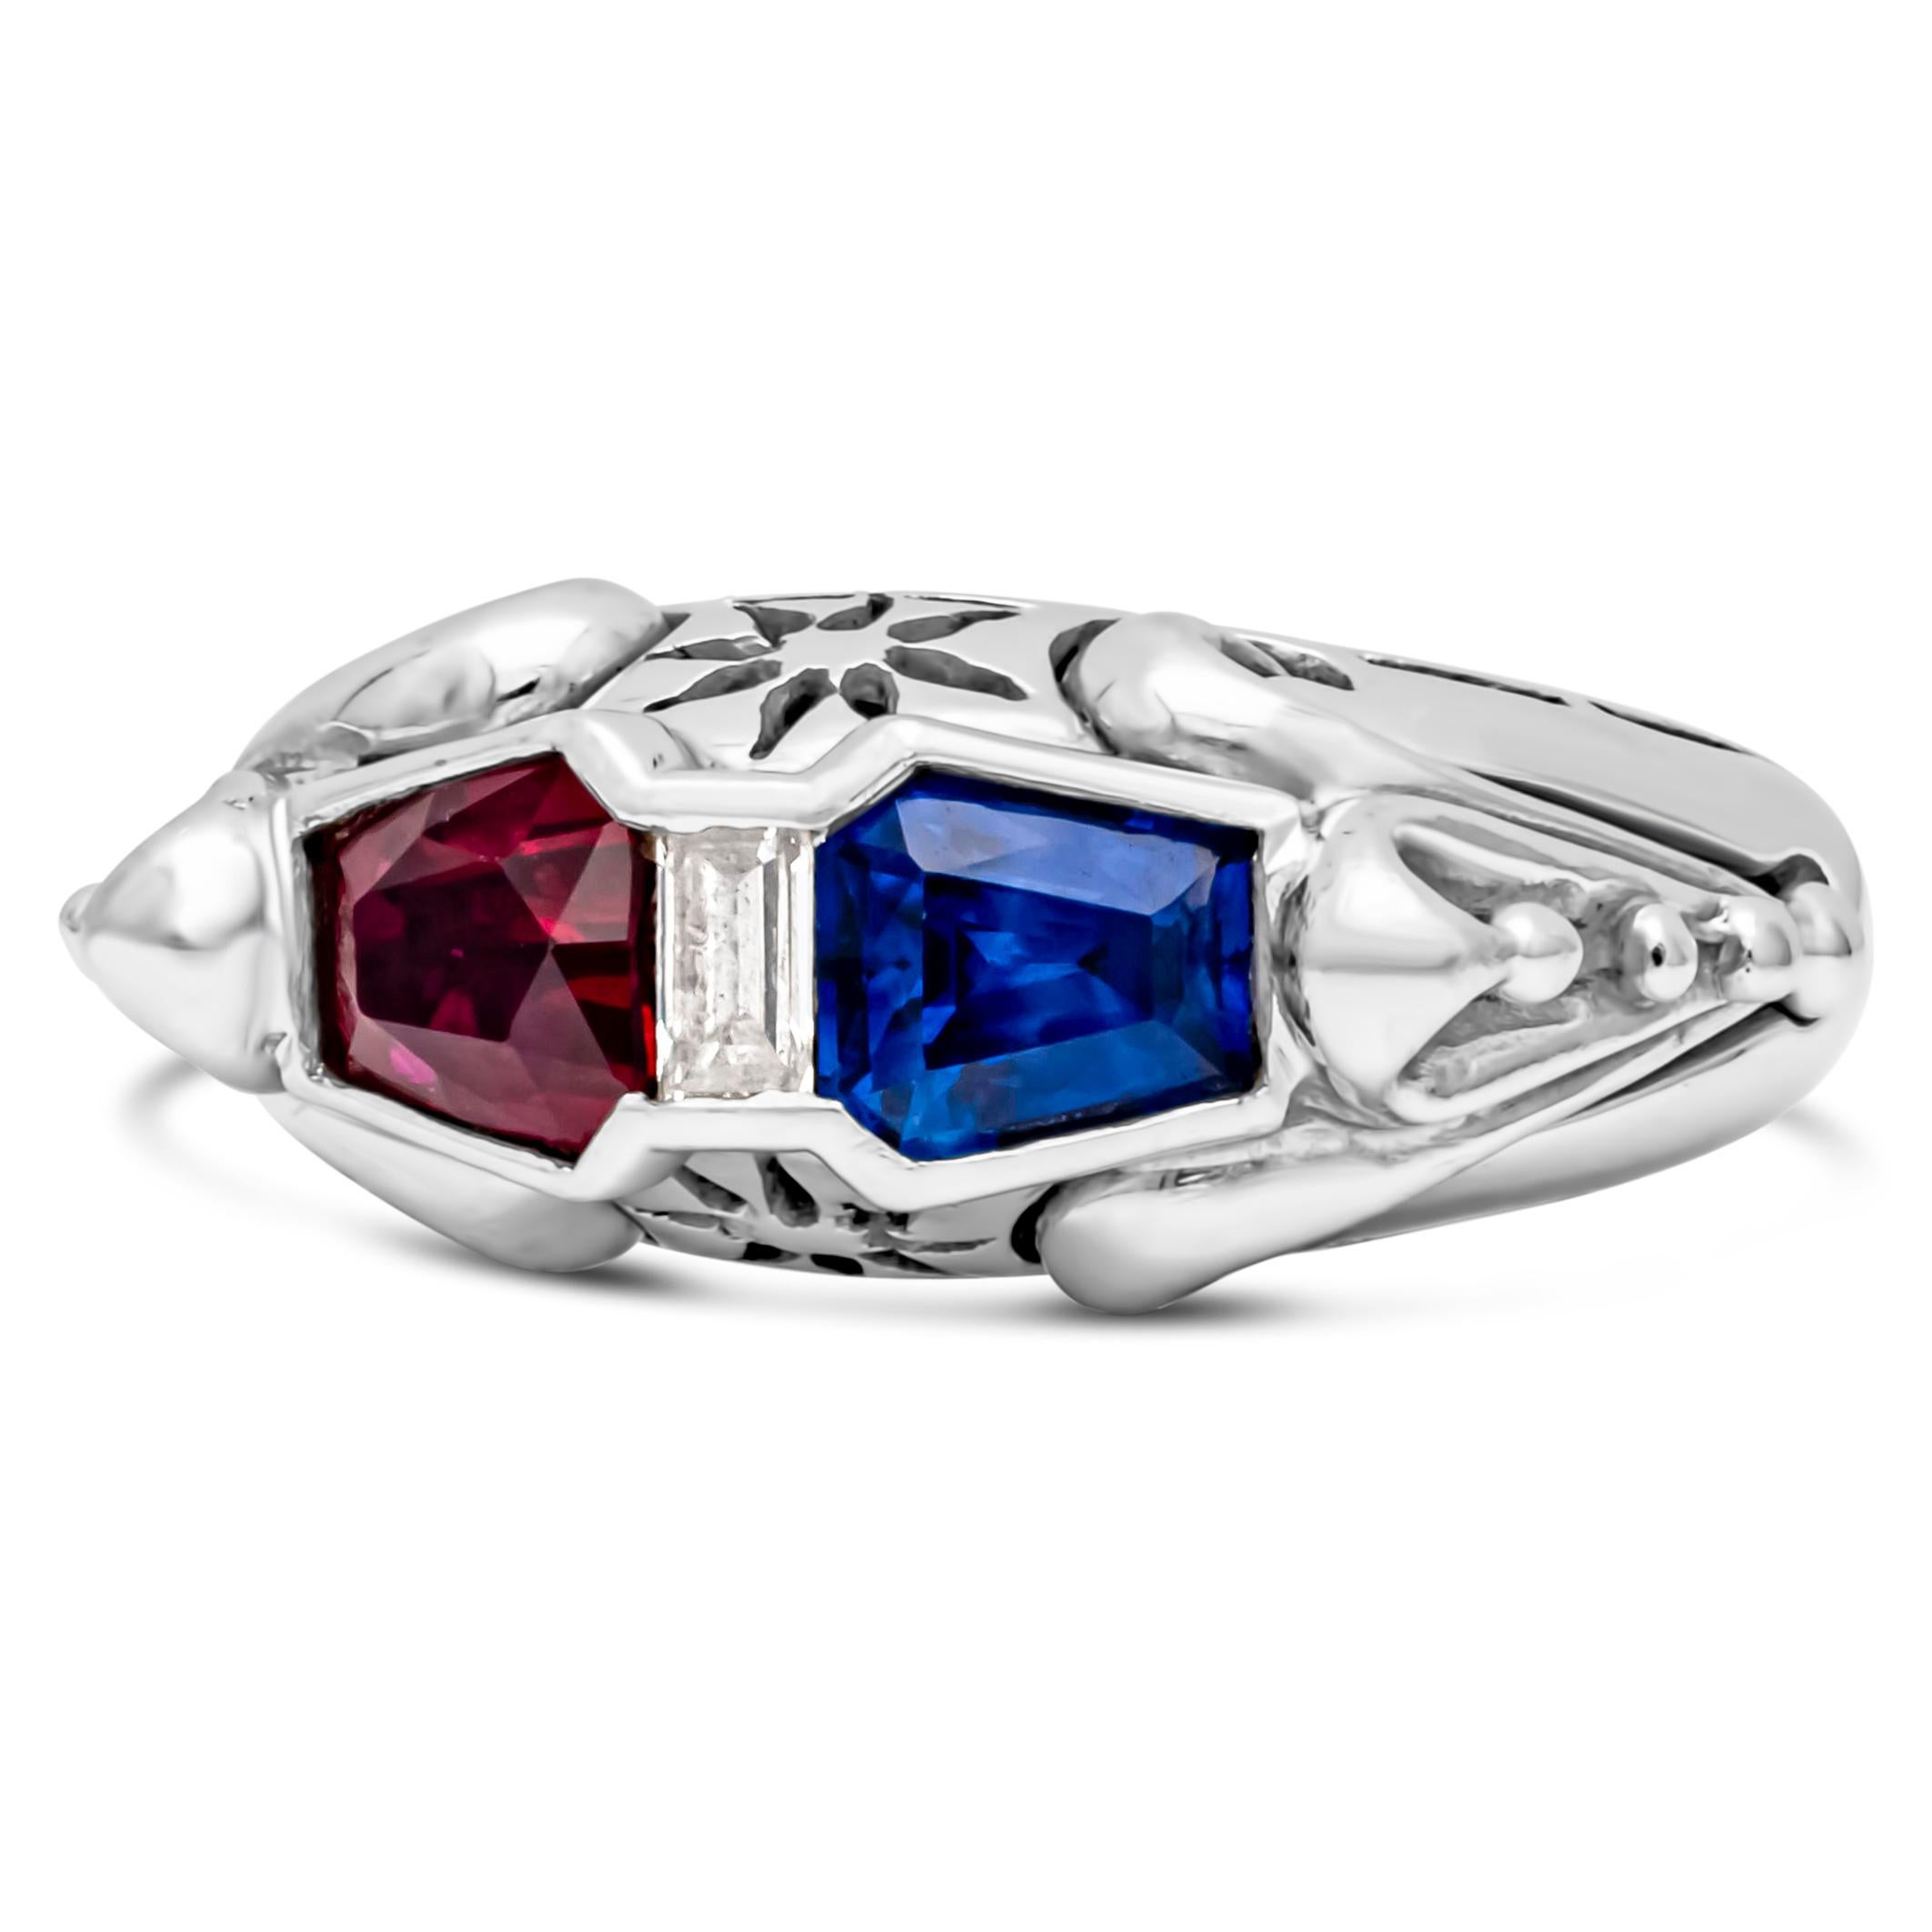 This beautiful vintage style engagement ring showcasing two GIA certified trapezoid cut Burmese ruby and natural 
no-heat Sri-Lanka blue sapphire weighing 0.80 carats approximately, set in an intricate design platinum mounting made from old world